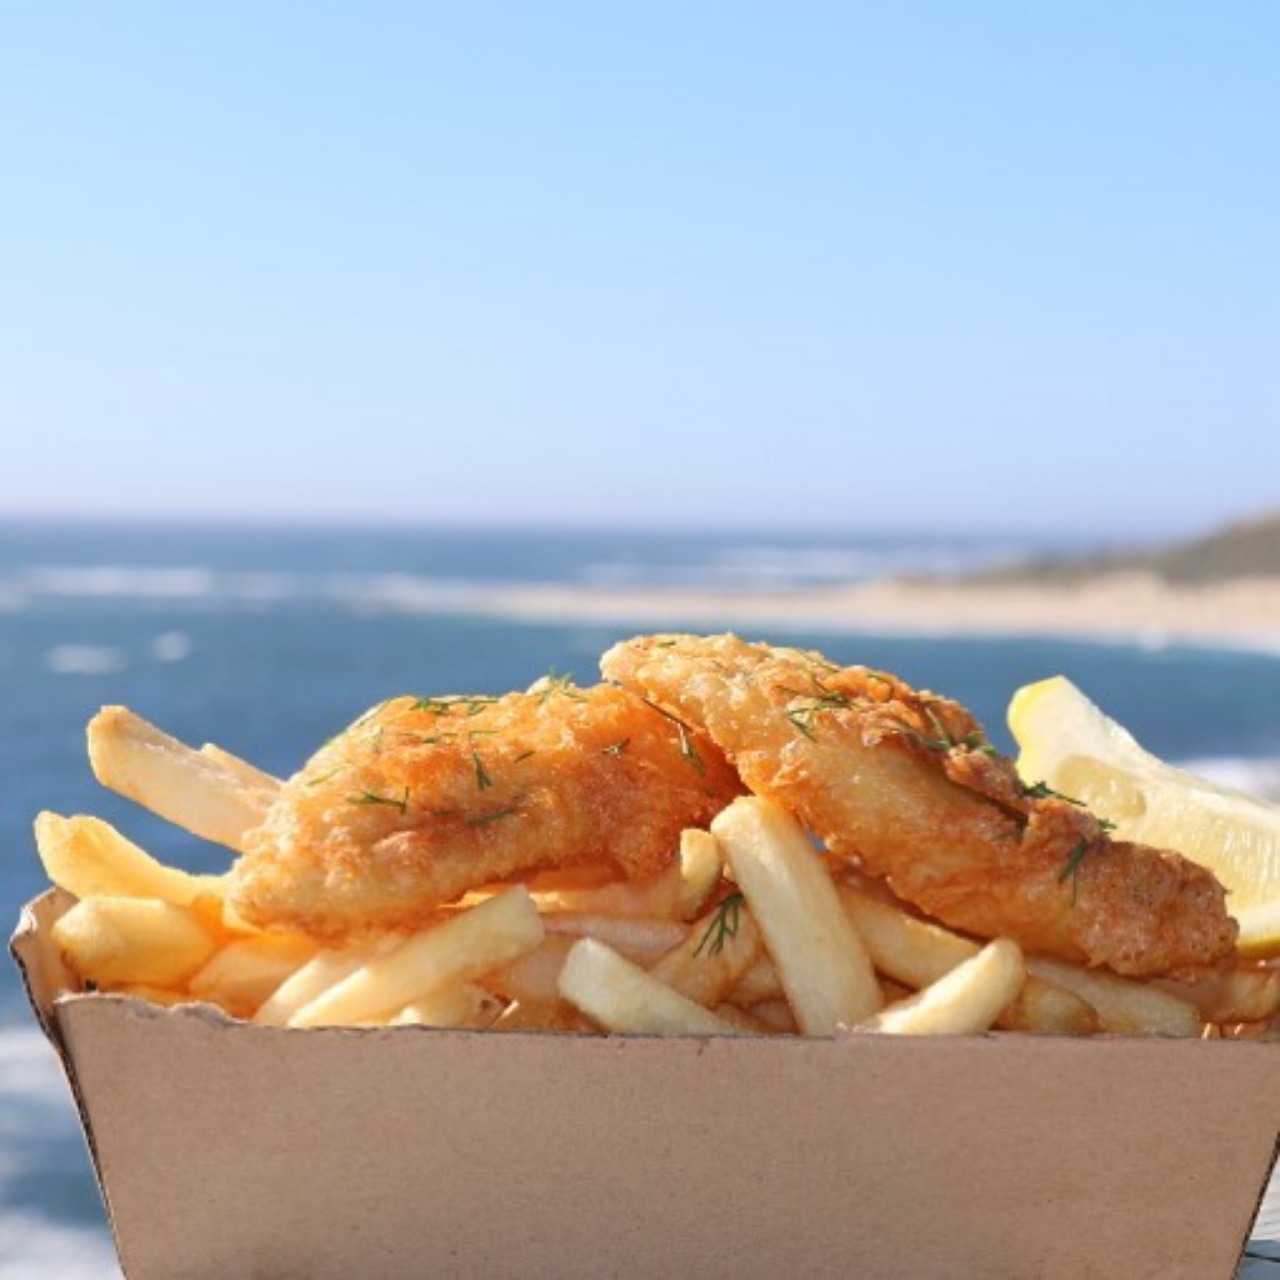 Best Beachside Fish & Chips in Perth